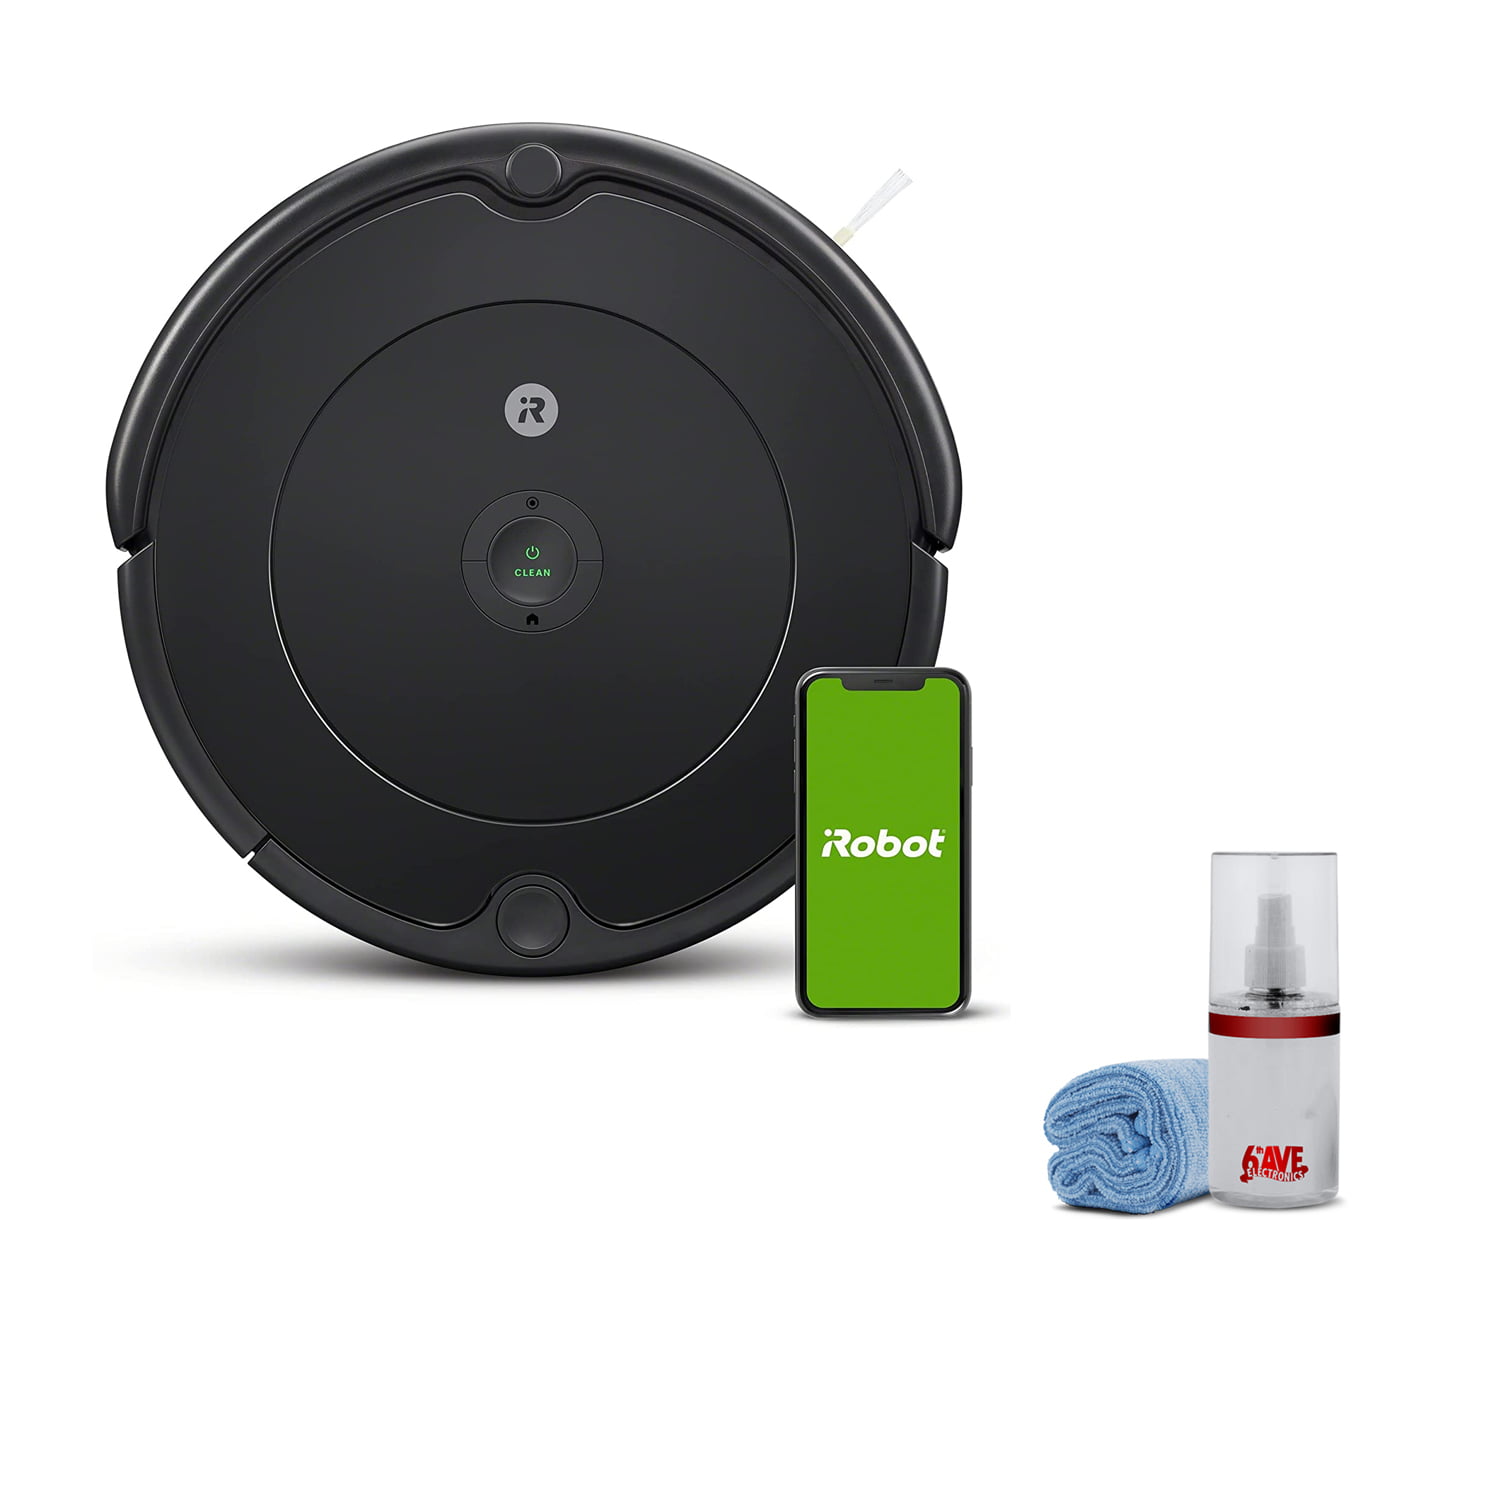 iRobot Roomba 692 Robot Vacuum-Wi-Fi Connectivity, Works with 